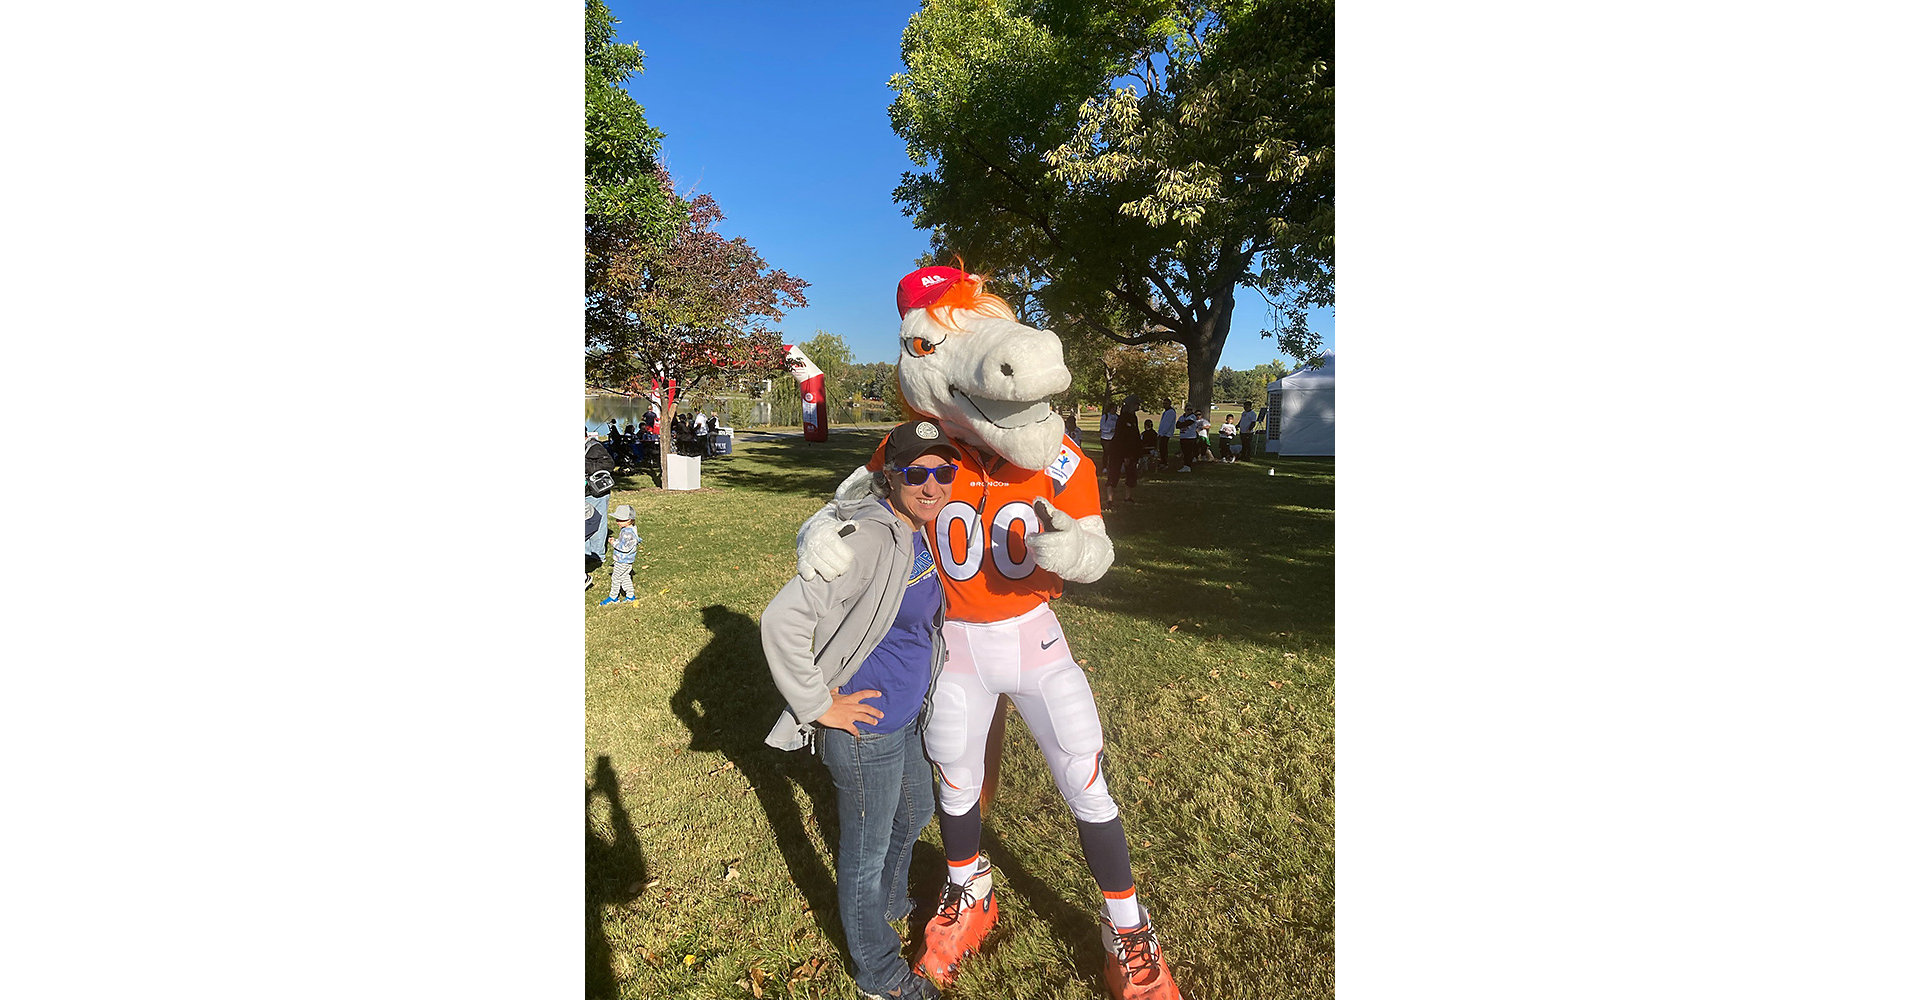 At the ALS event with horse mascot